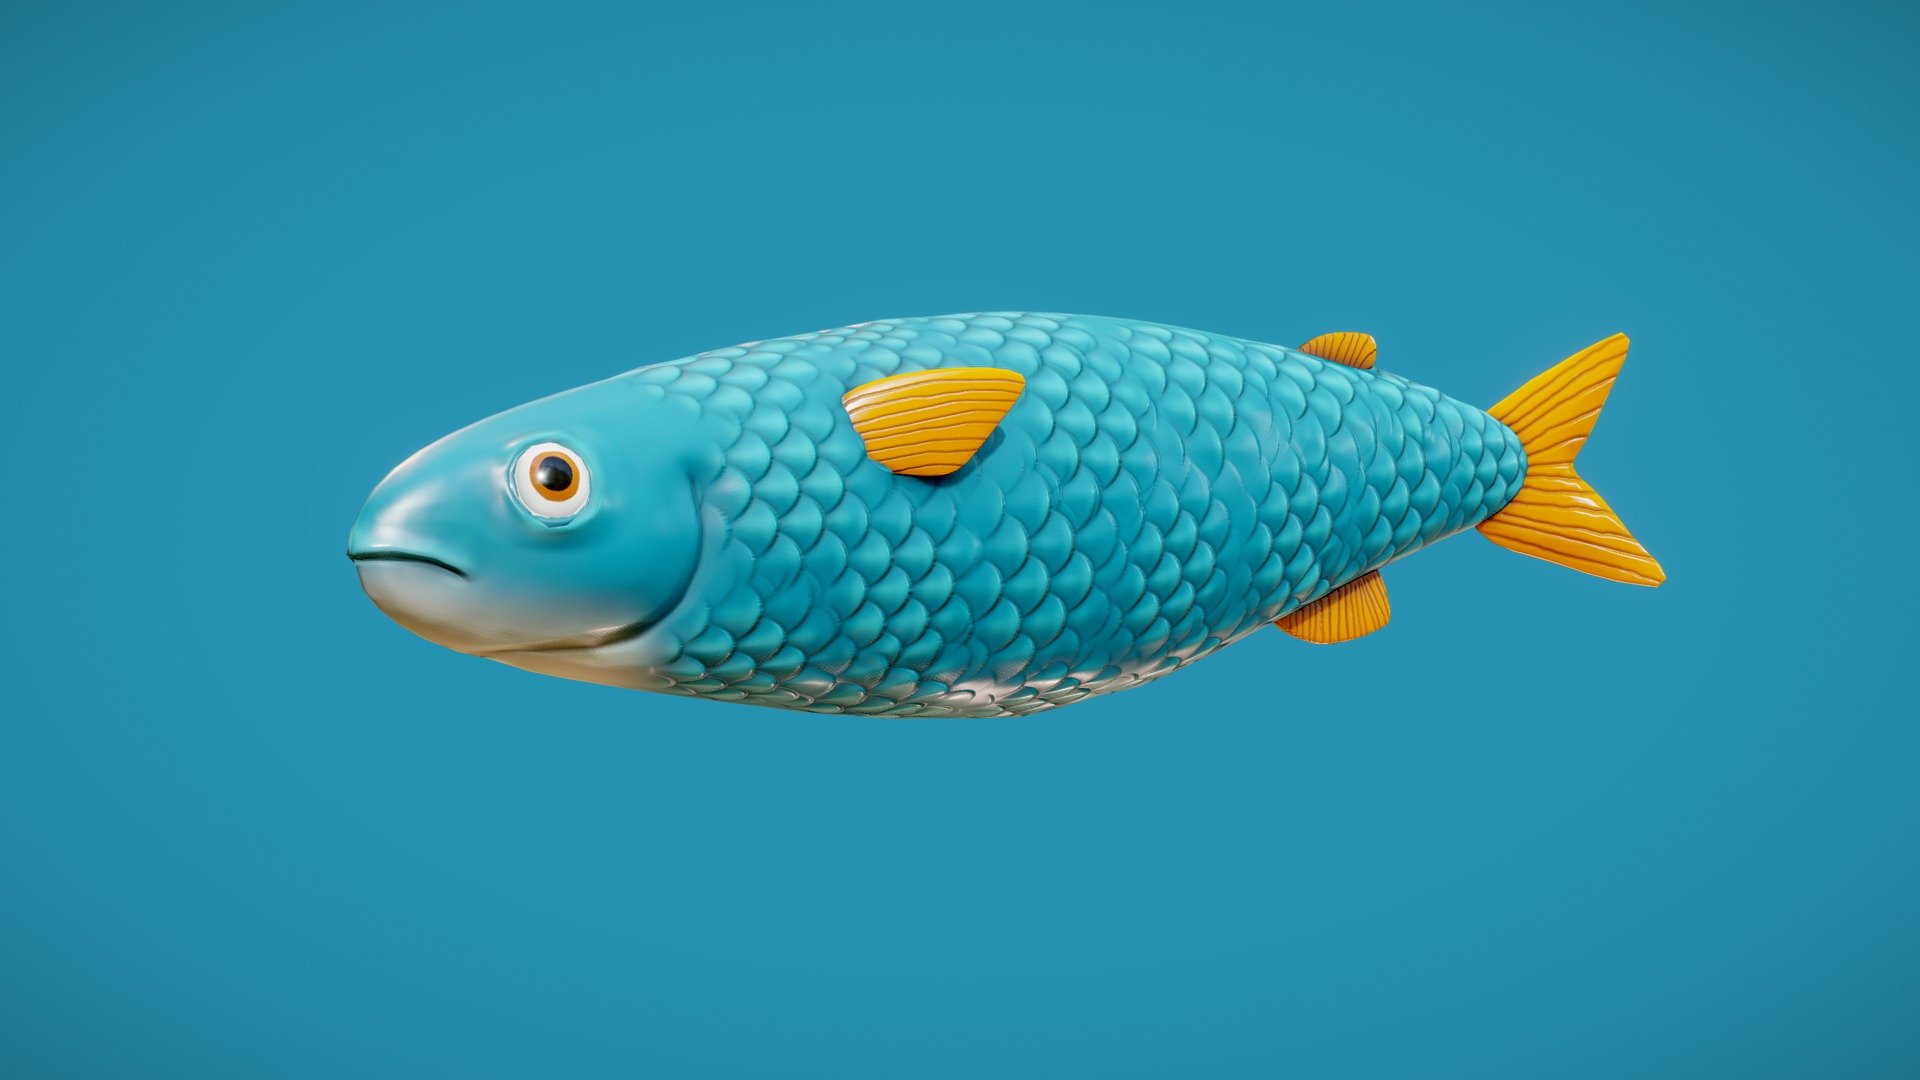 Low Poly Fish for your renders and games

Textures:

Diffuse color, Roughness, Normal

All textures are 2K

Files Formats:

Blend

Fbx

Obj - Fish - Buy Royalty Free 3D model by Vanessa Araújo (@vanessa3d) 3d model